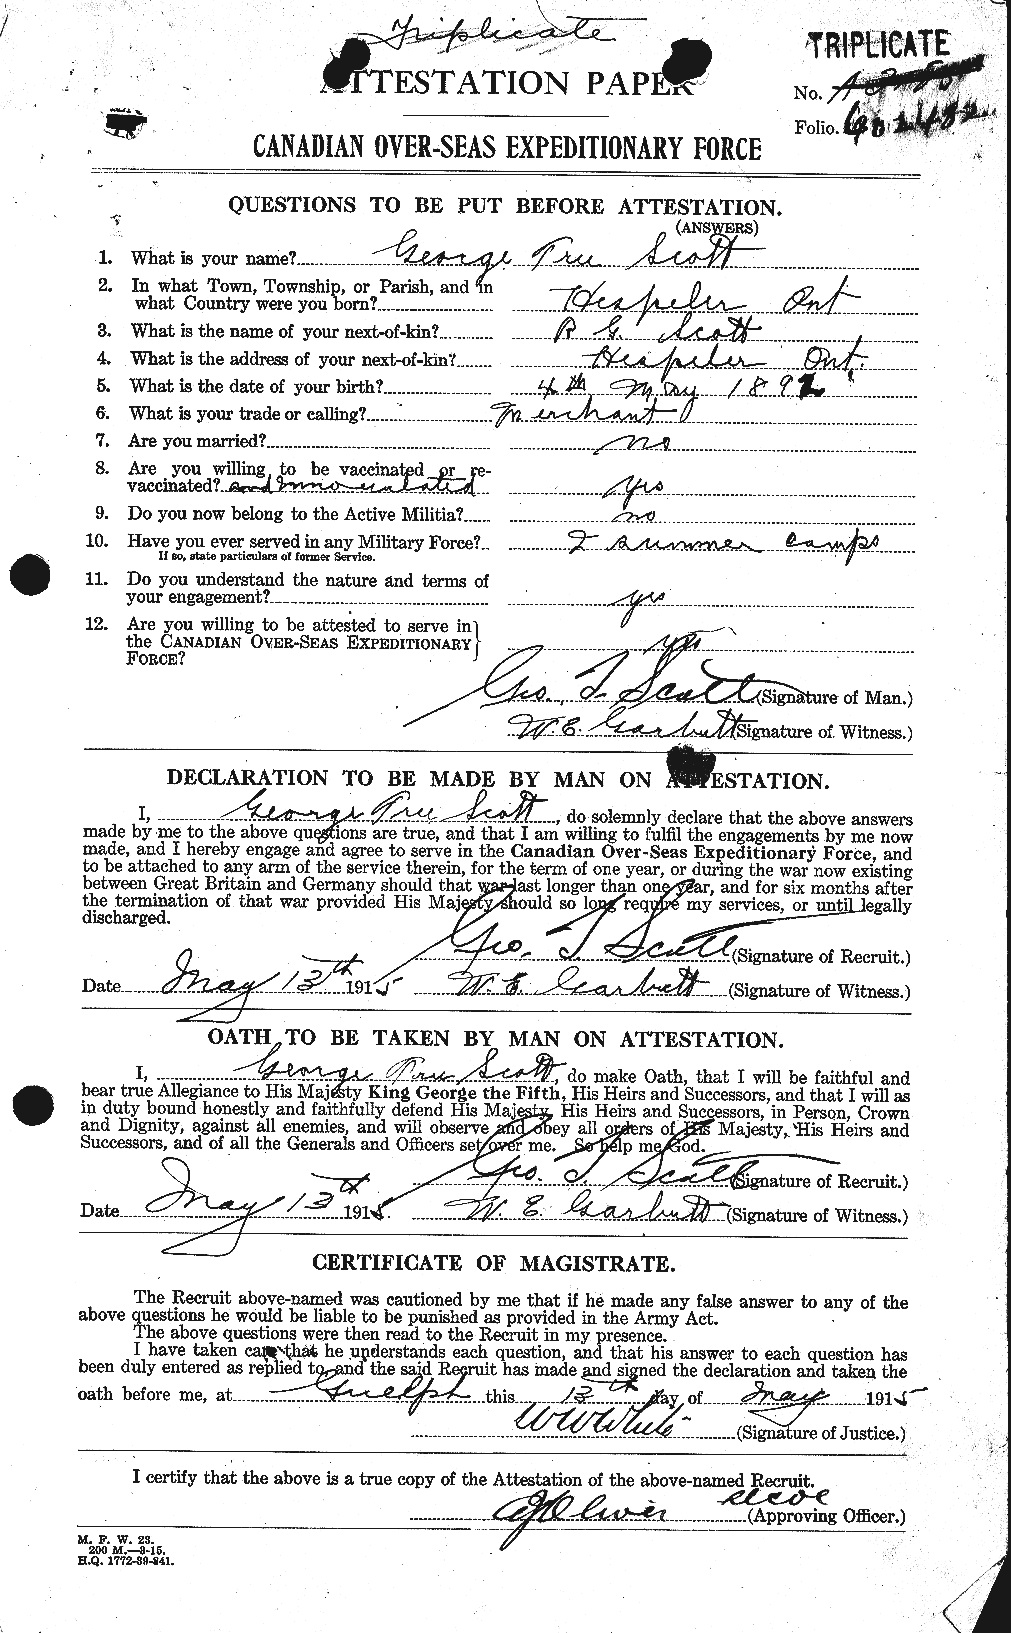 Personnel Records of the First World War - CEF 083139a